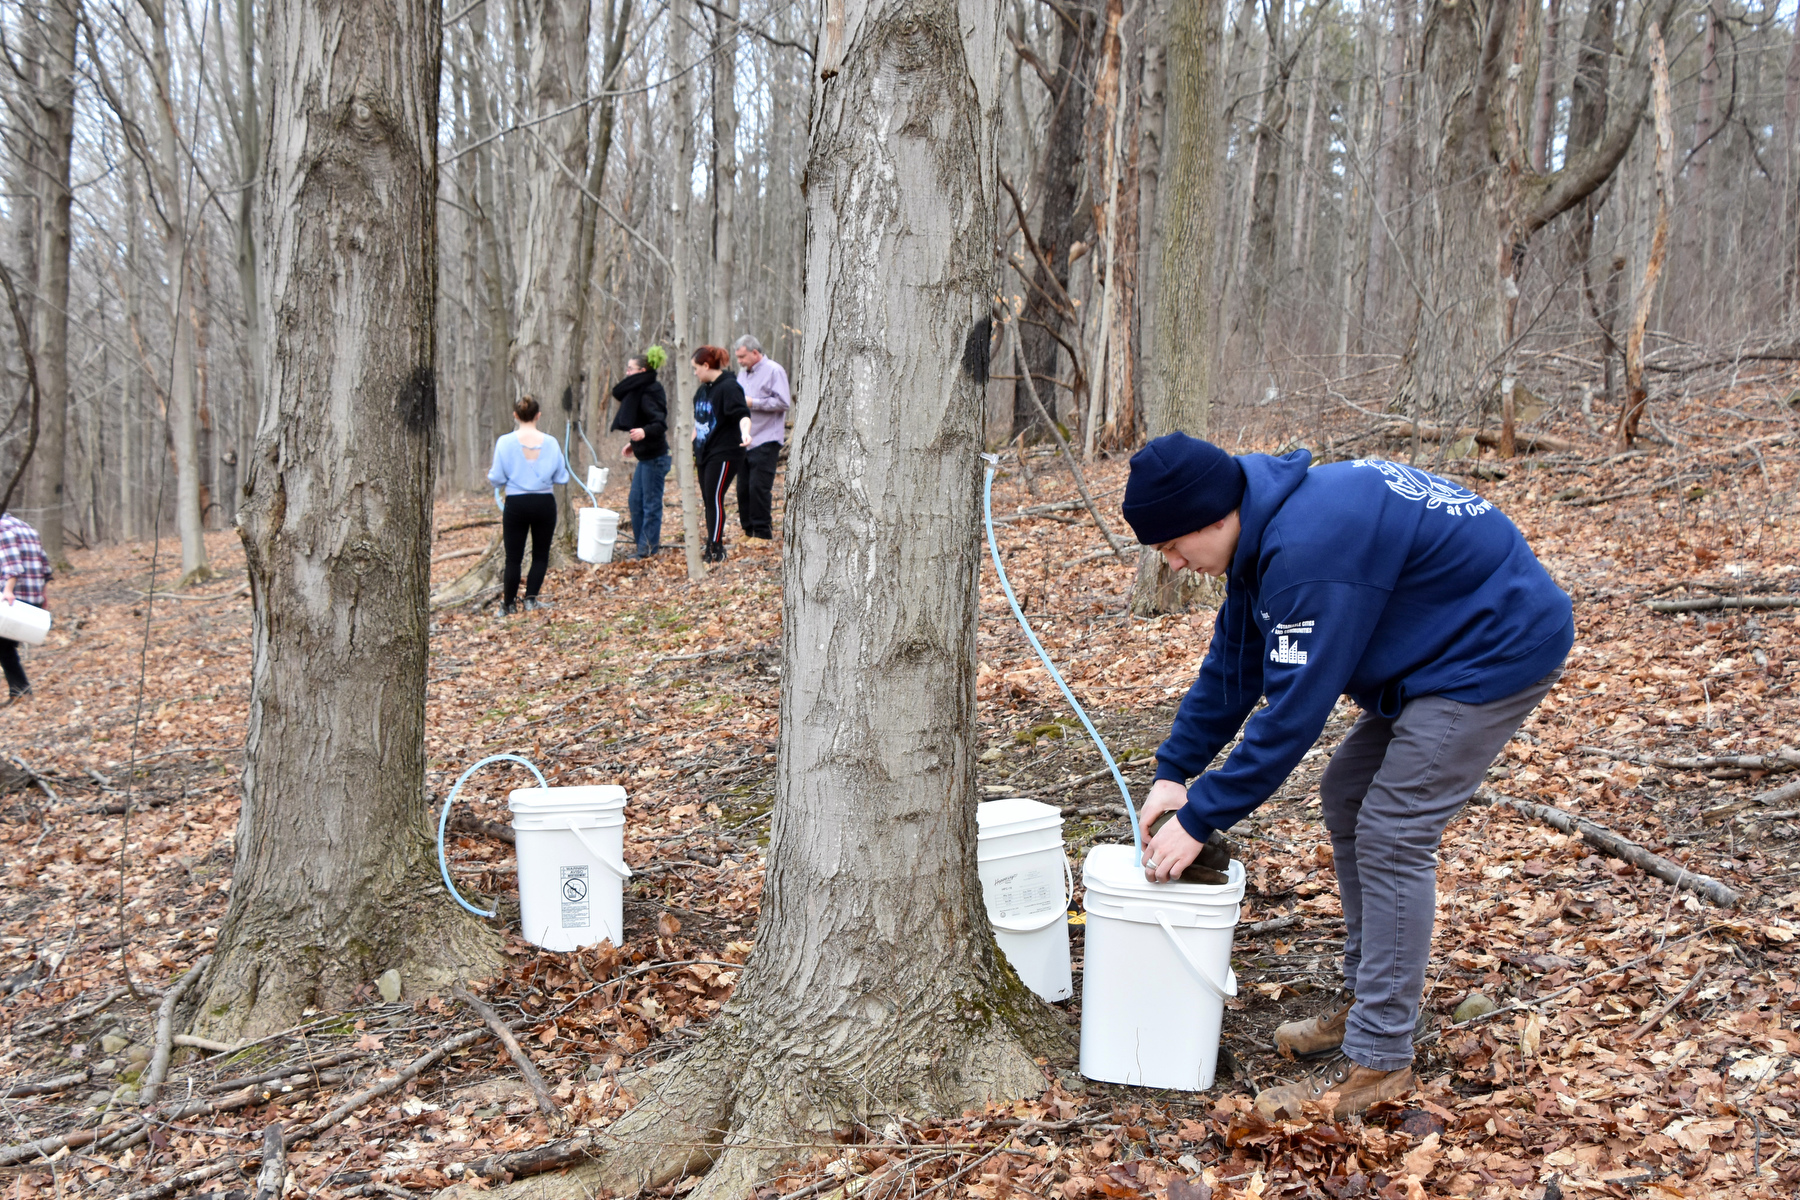 Students learned how to collect the sap from sugar maple trees and how that will lead to making maple syrup in a unique opportunity through the Sustainability Office, directed by Kate Spector and Jon Mills, and a Native American Studies class taught by anthropology department faculty member Michael Chaness.